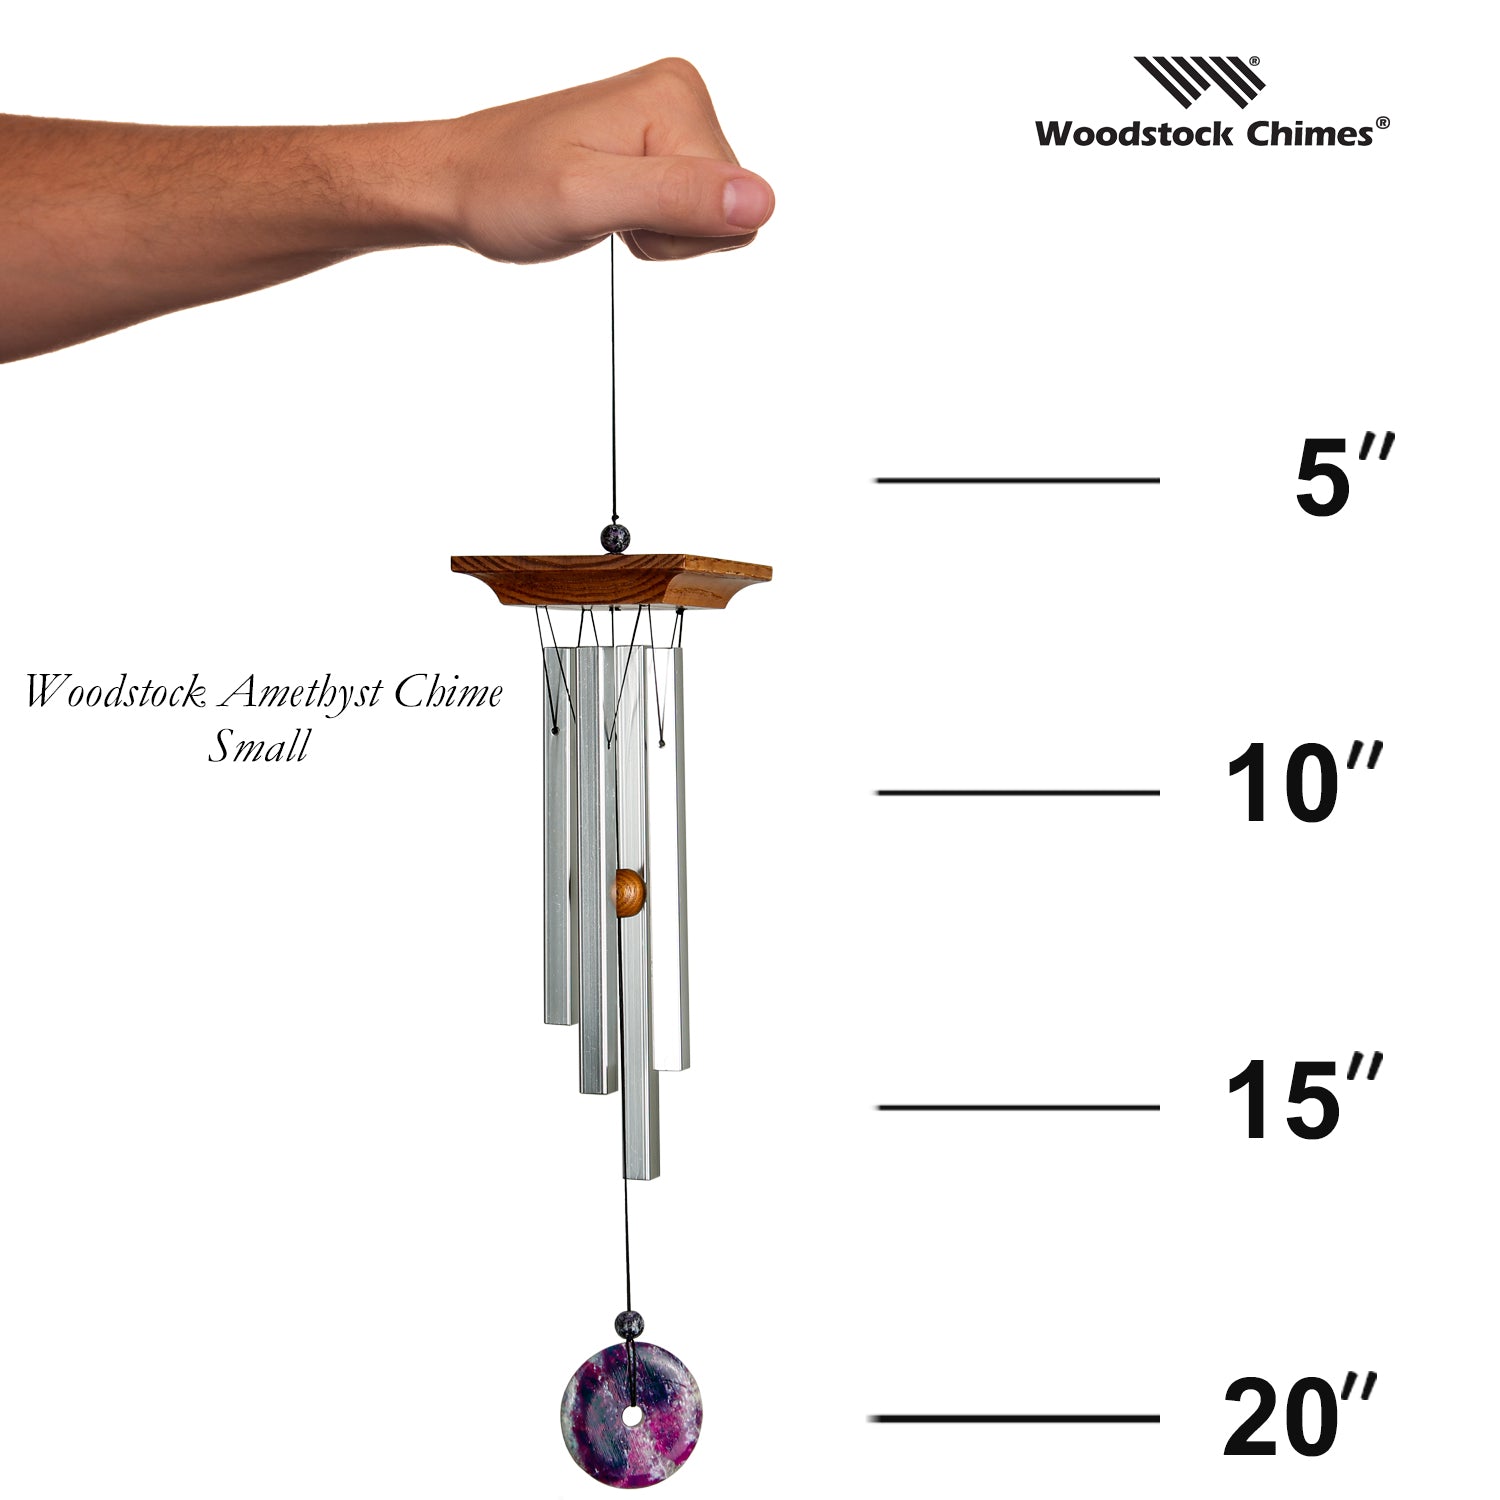 Amethyst Chime - Small proportion image